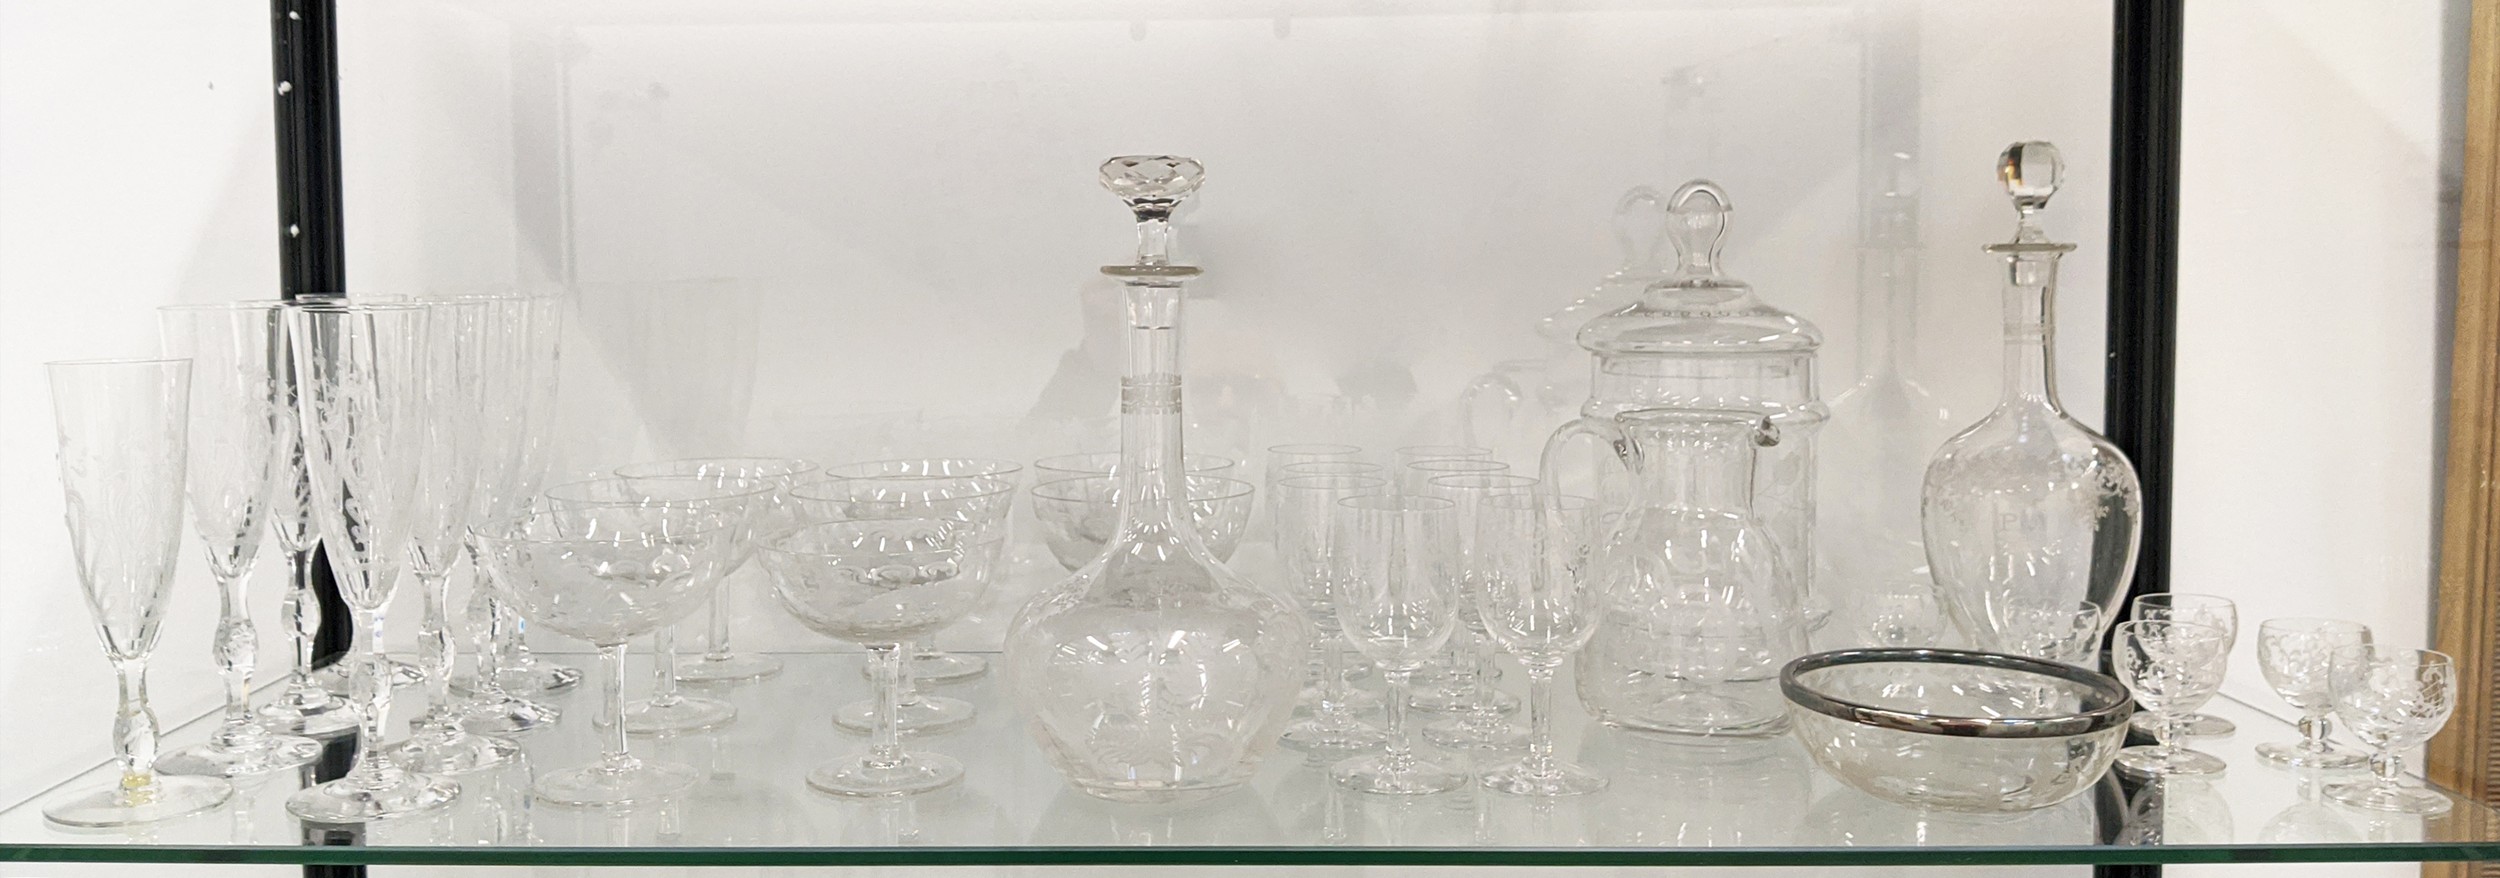 QUANTITY OF ENGRAVED GLASSWARE, including eight champagne flutes, decanter vodka glass set, eight